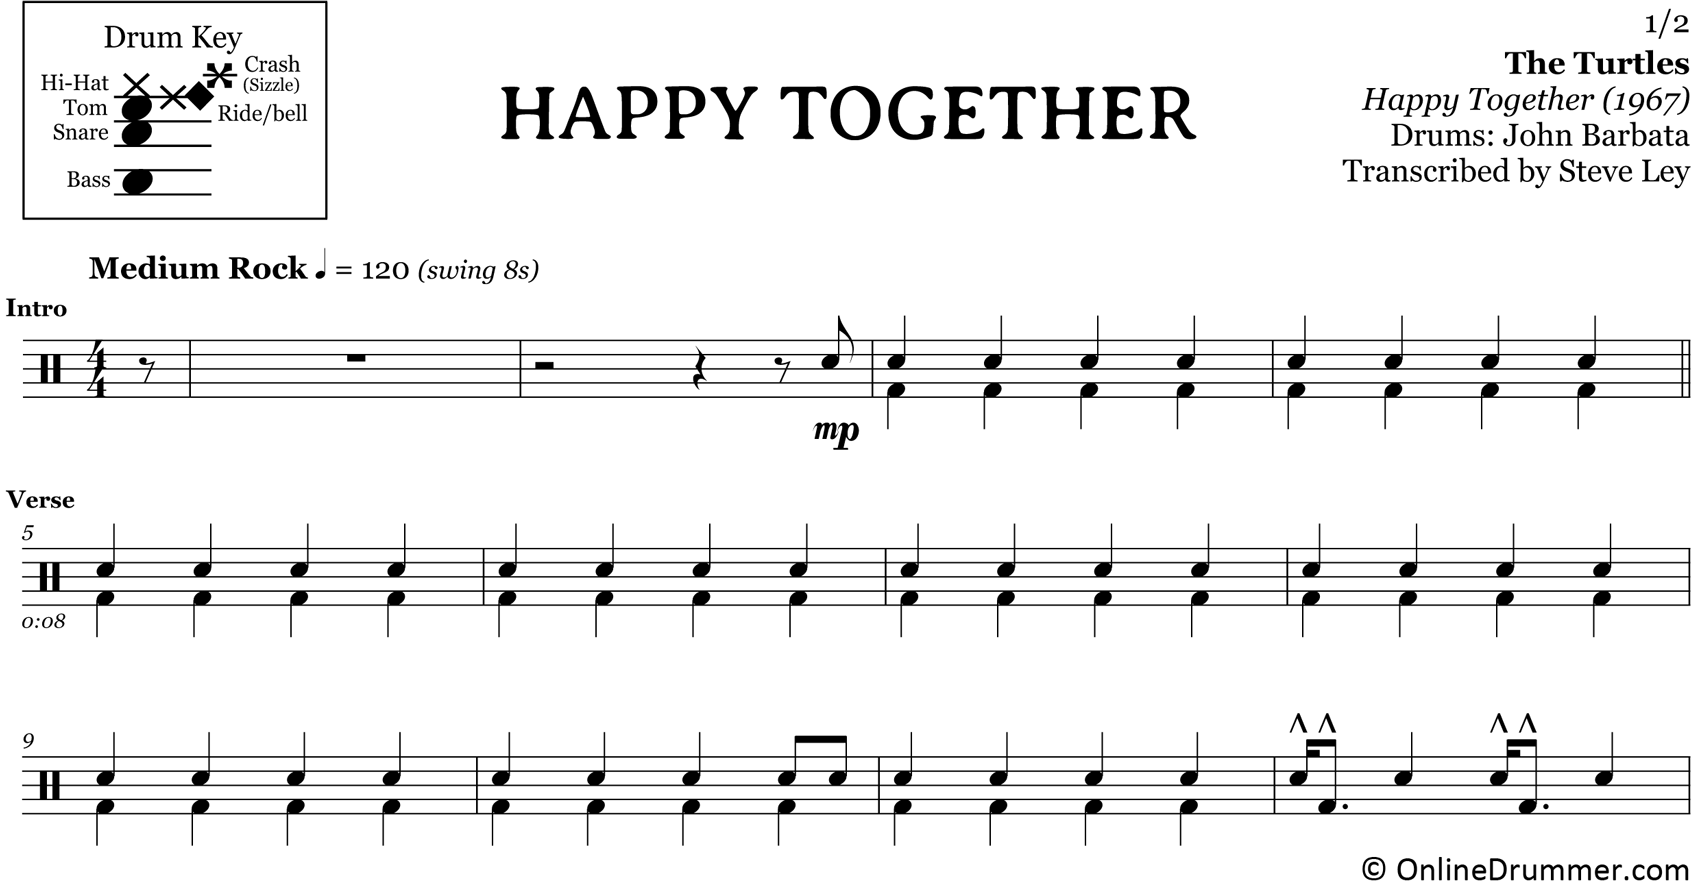 Happy Together - The Turtles - Drum Sheet Music